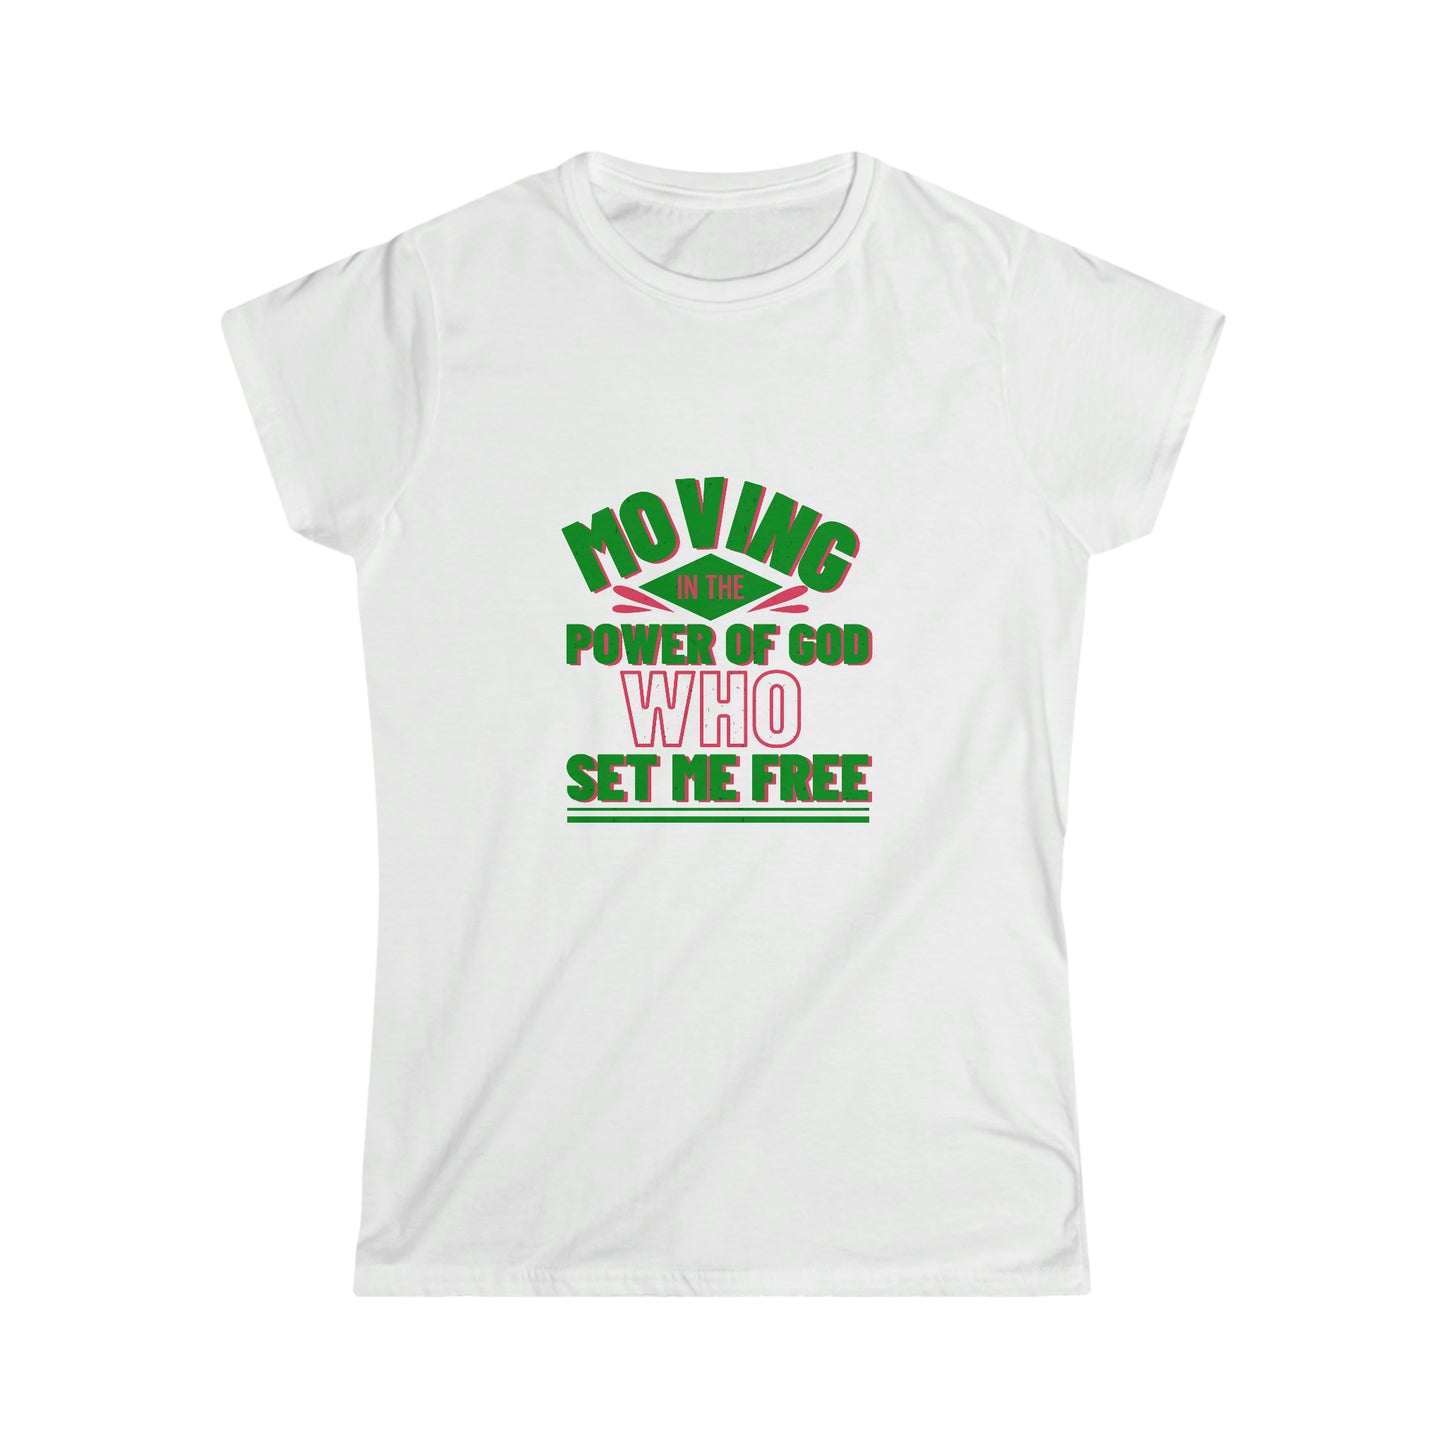 Moving In The Power Of God Who Set Me Free Women's T-shirt